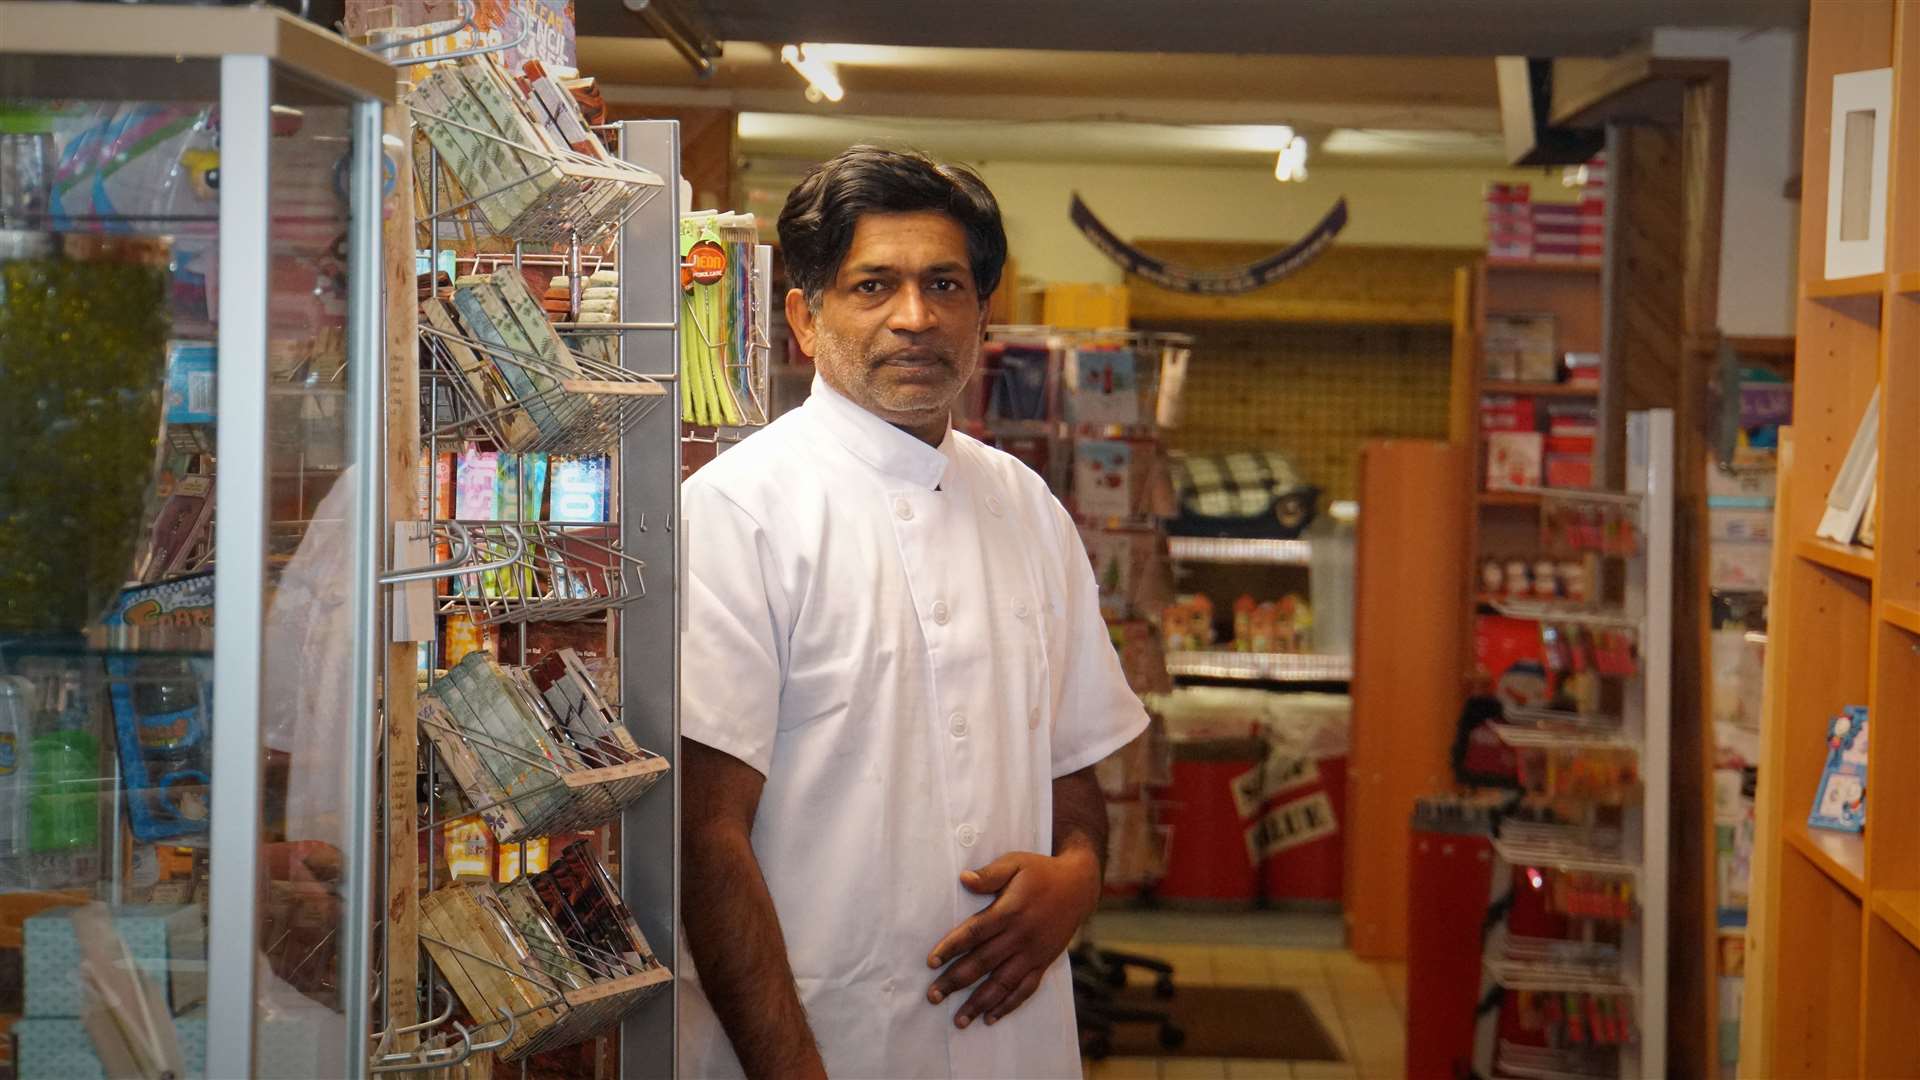 Josuva shows that there is more to his ground floor shop than just selling newspapers and has everything from dog chews to children's toys and stationery.